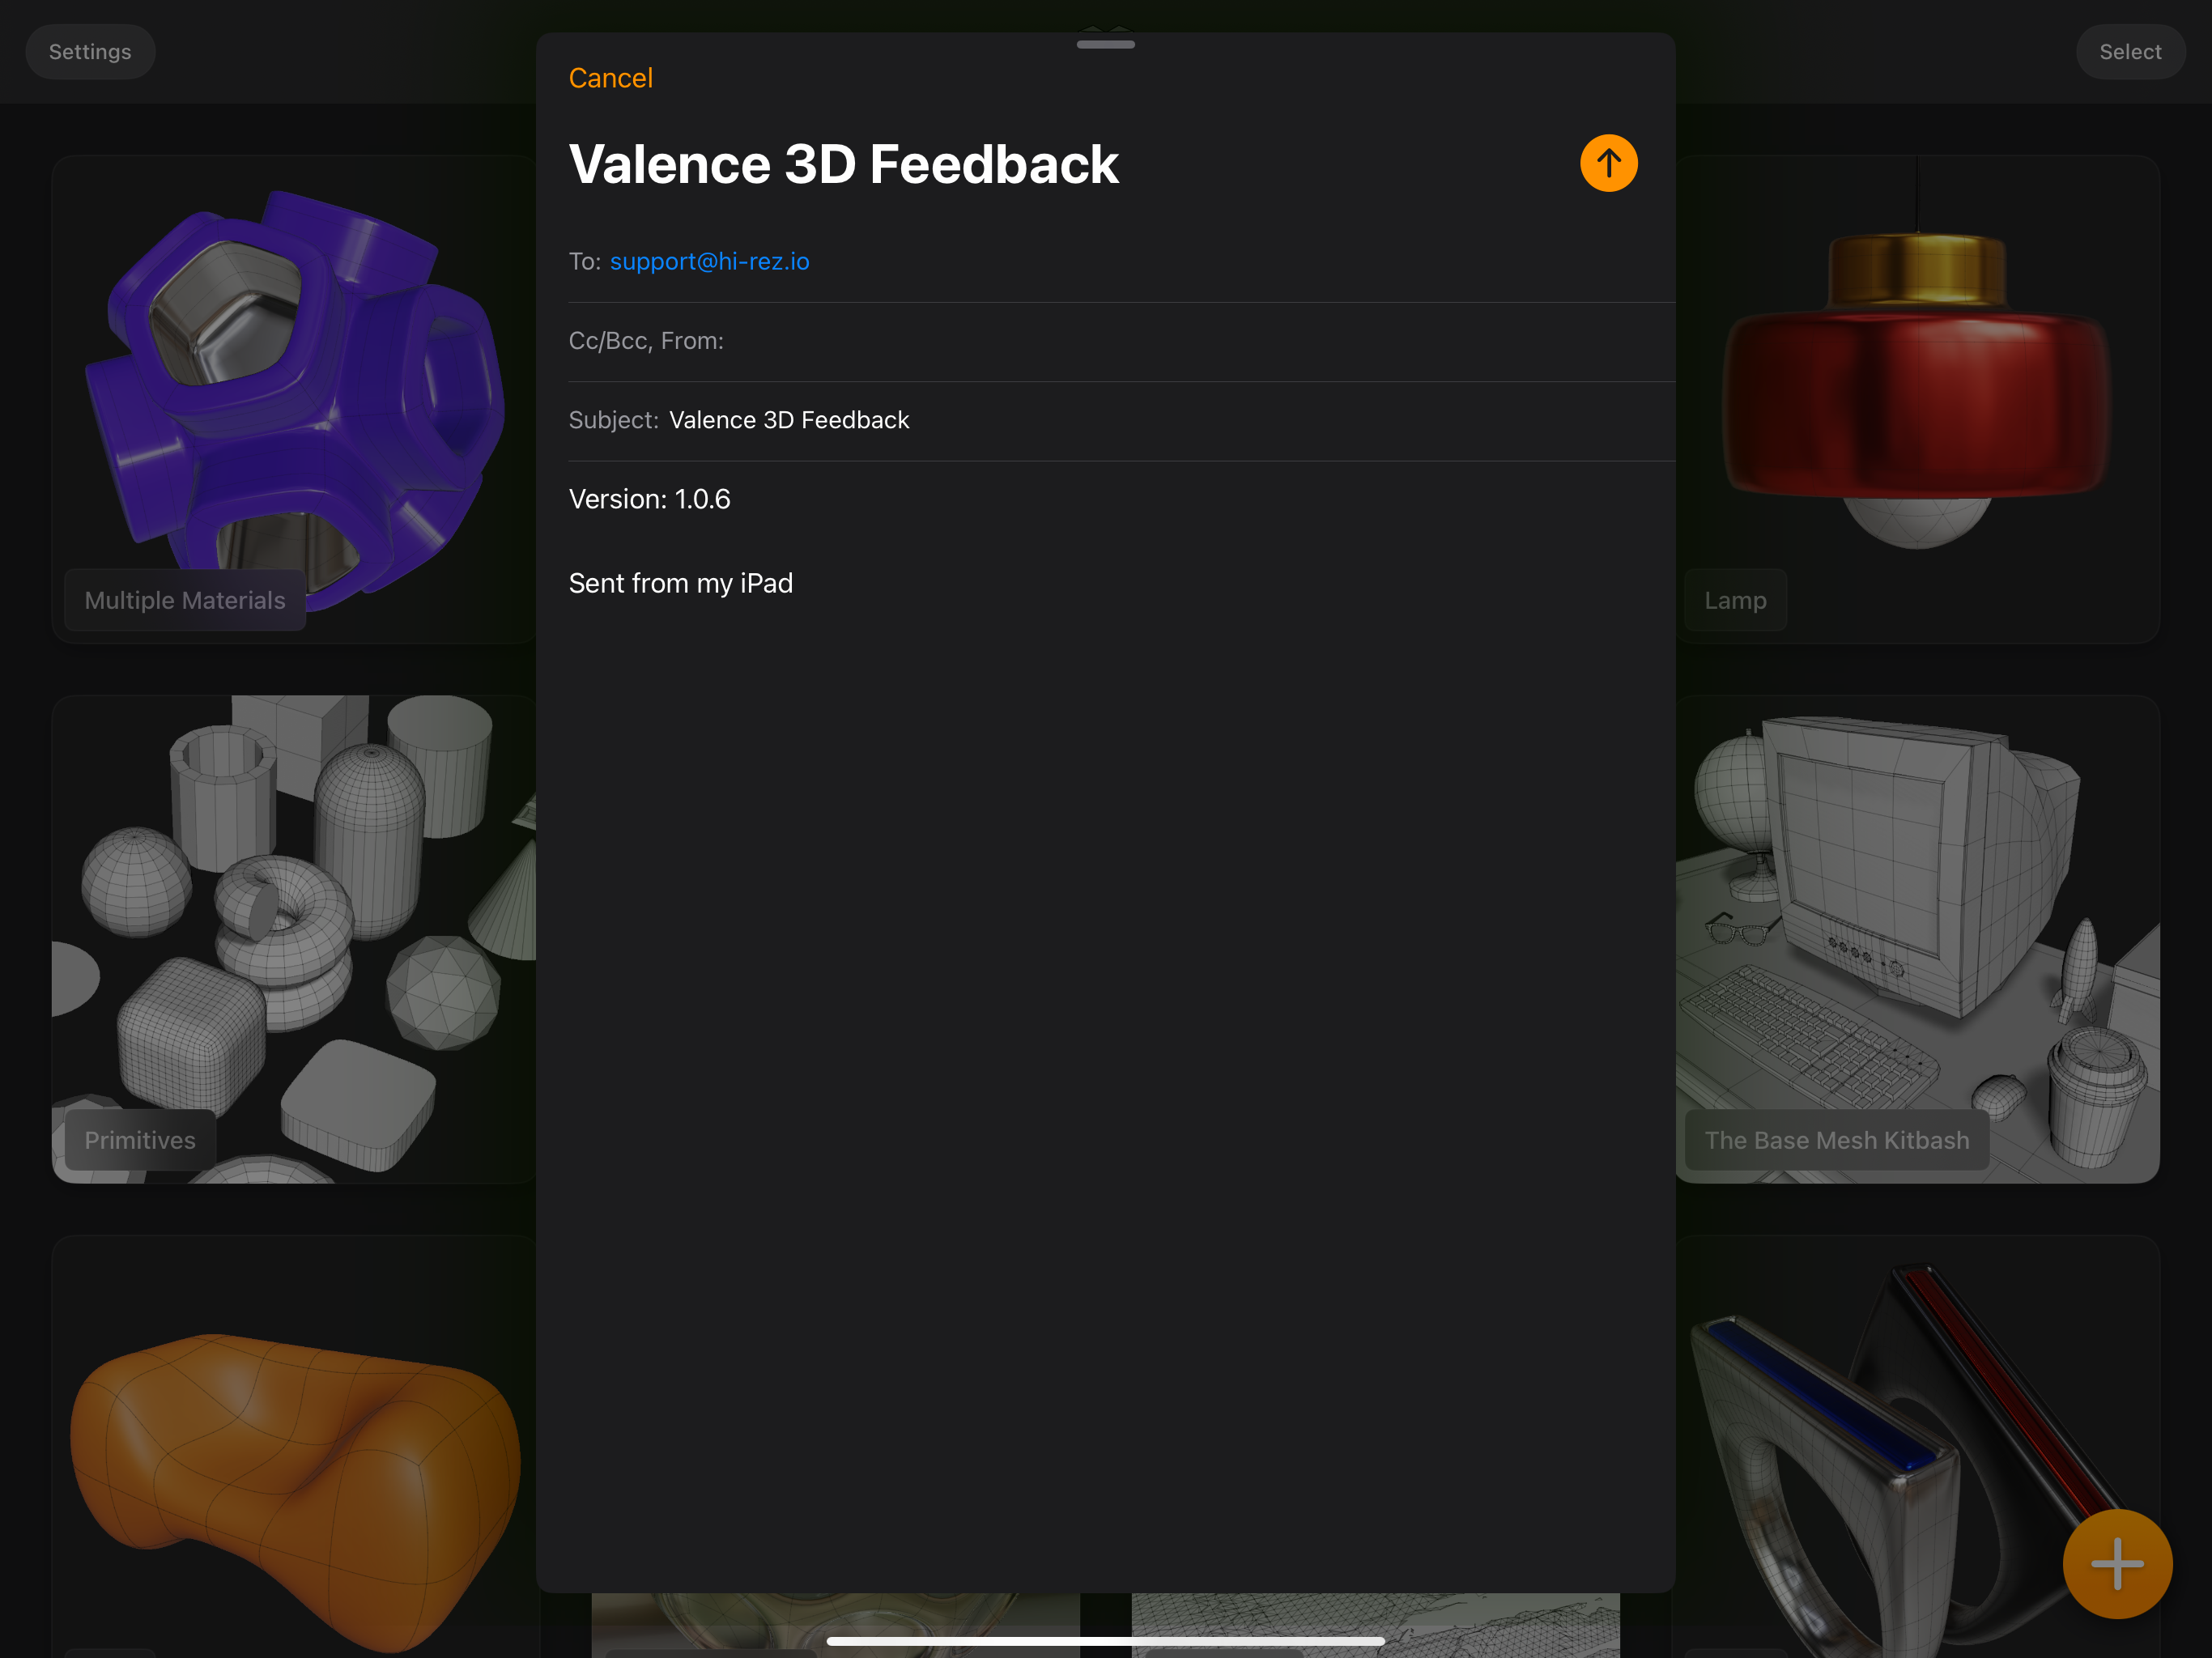 Valence 3D App Submit Feedback